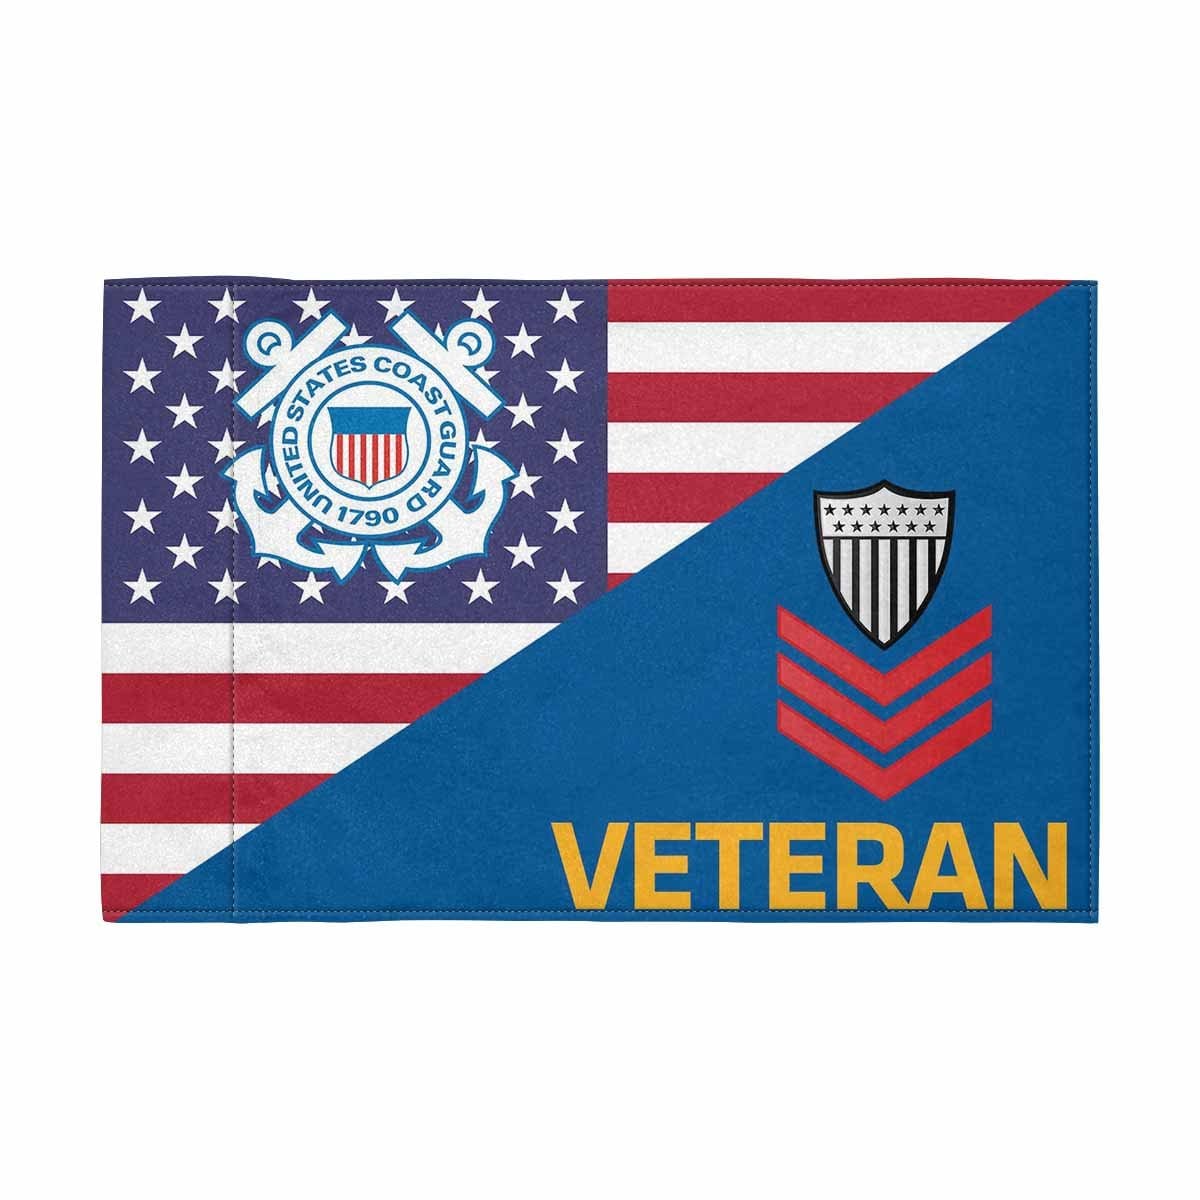 US Coast Guard E-6 Collar Device Veteran Motorcycle Flag 9" x 6" Twin-Side Printing D01-MotorcycleFlag-USCG-Veterans Nation